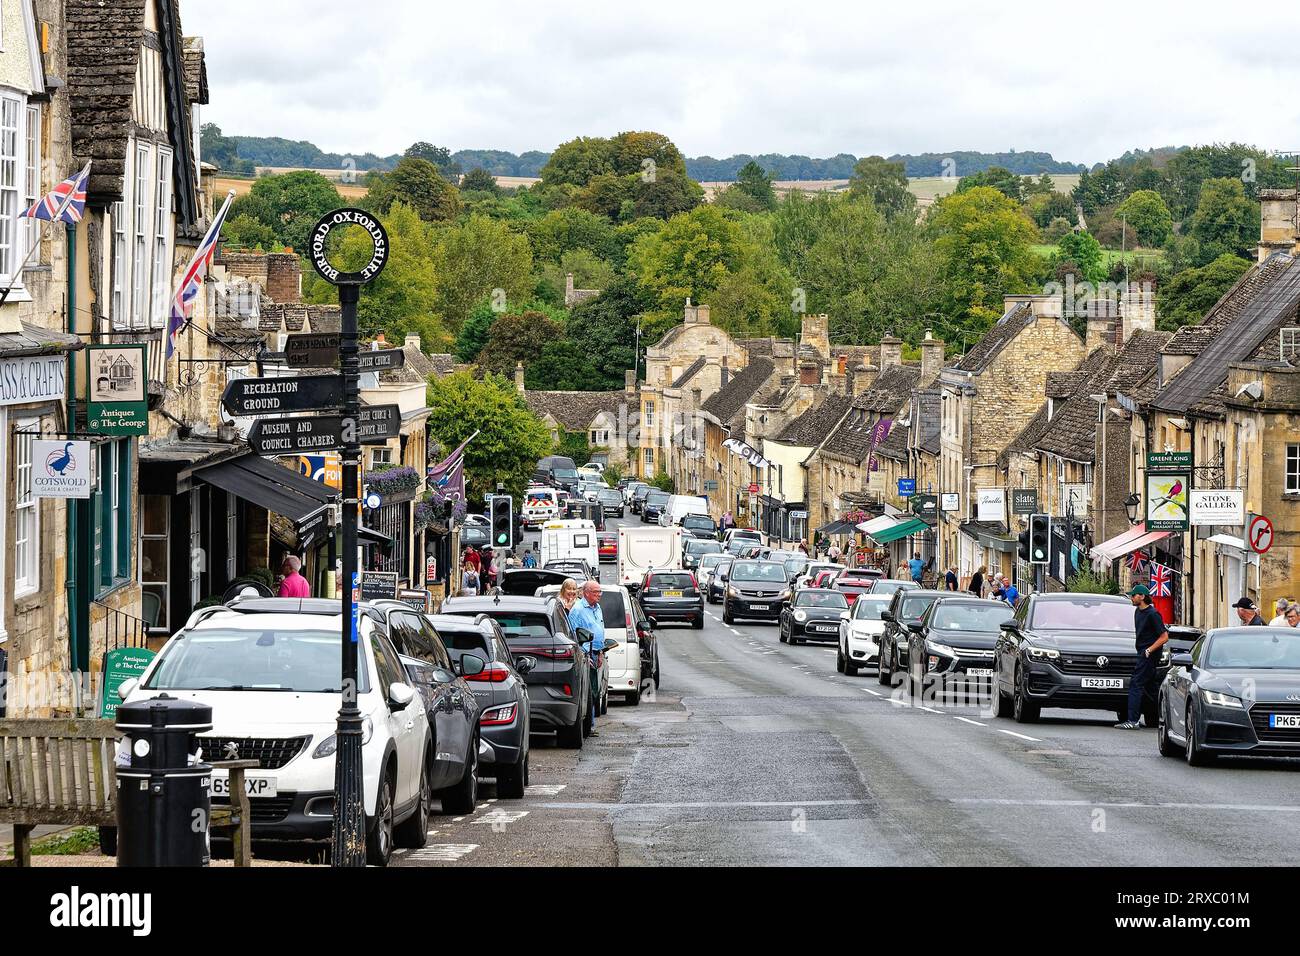 A busy Burford high street, Oxfordshire England UK Stock Photo